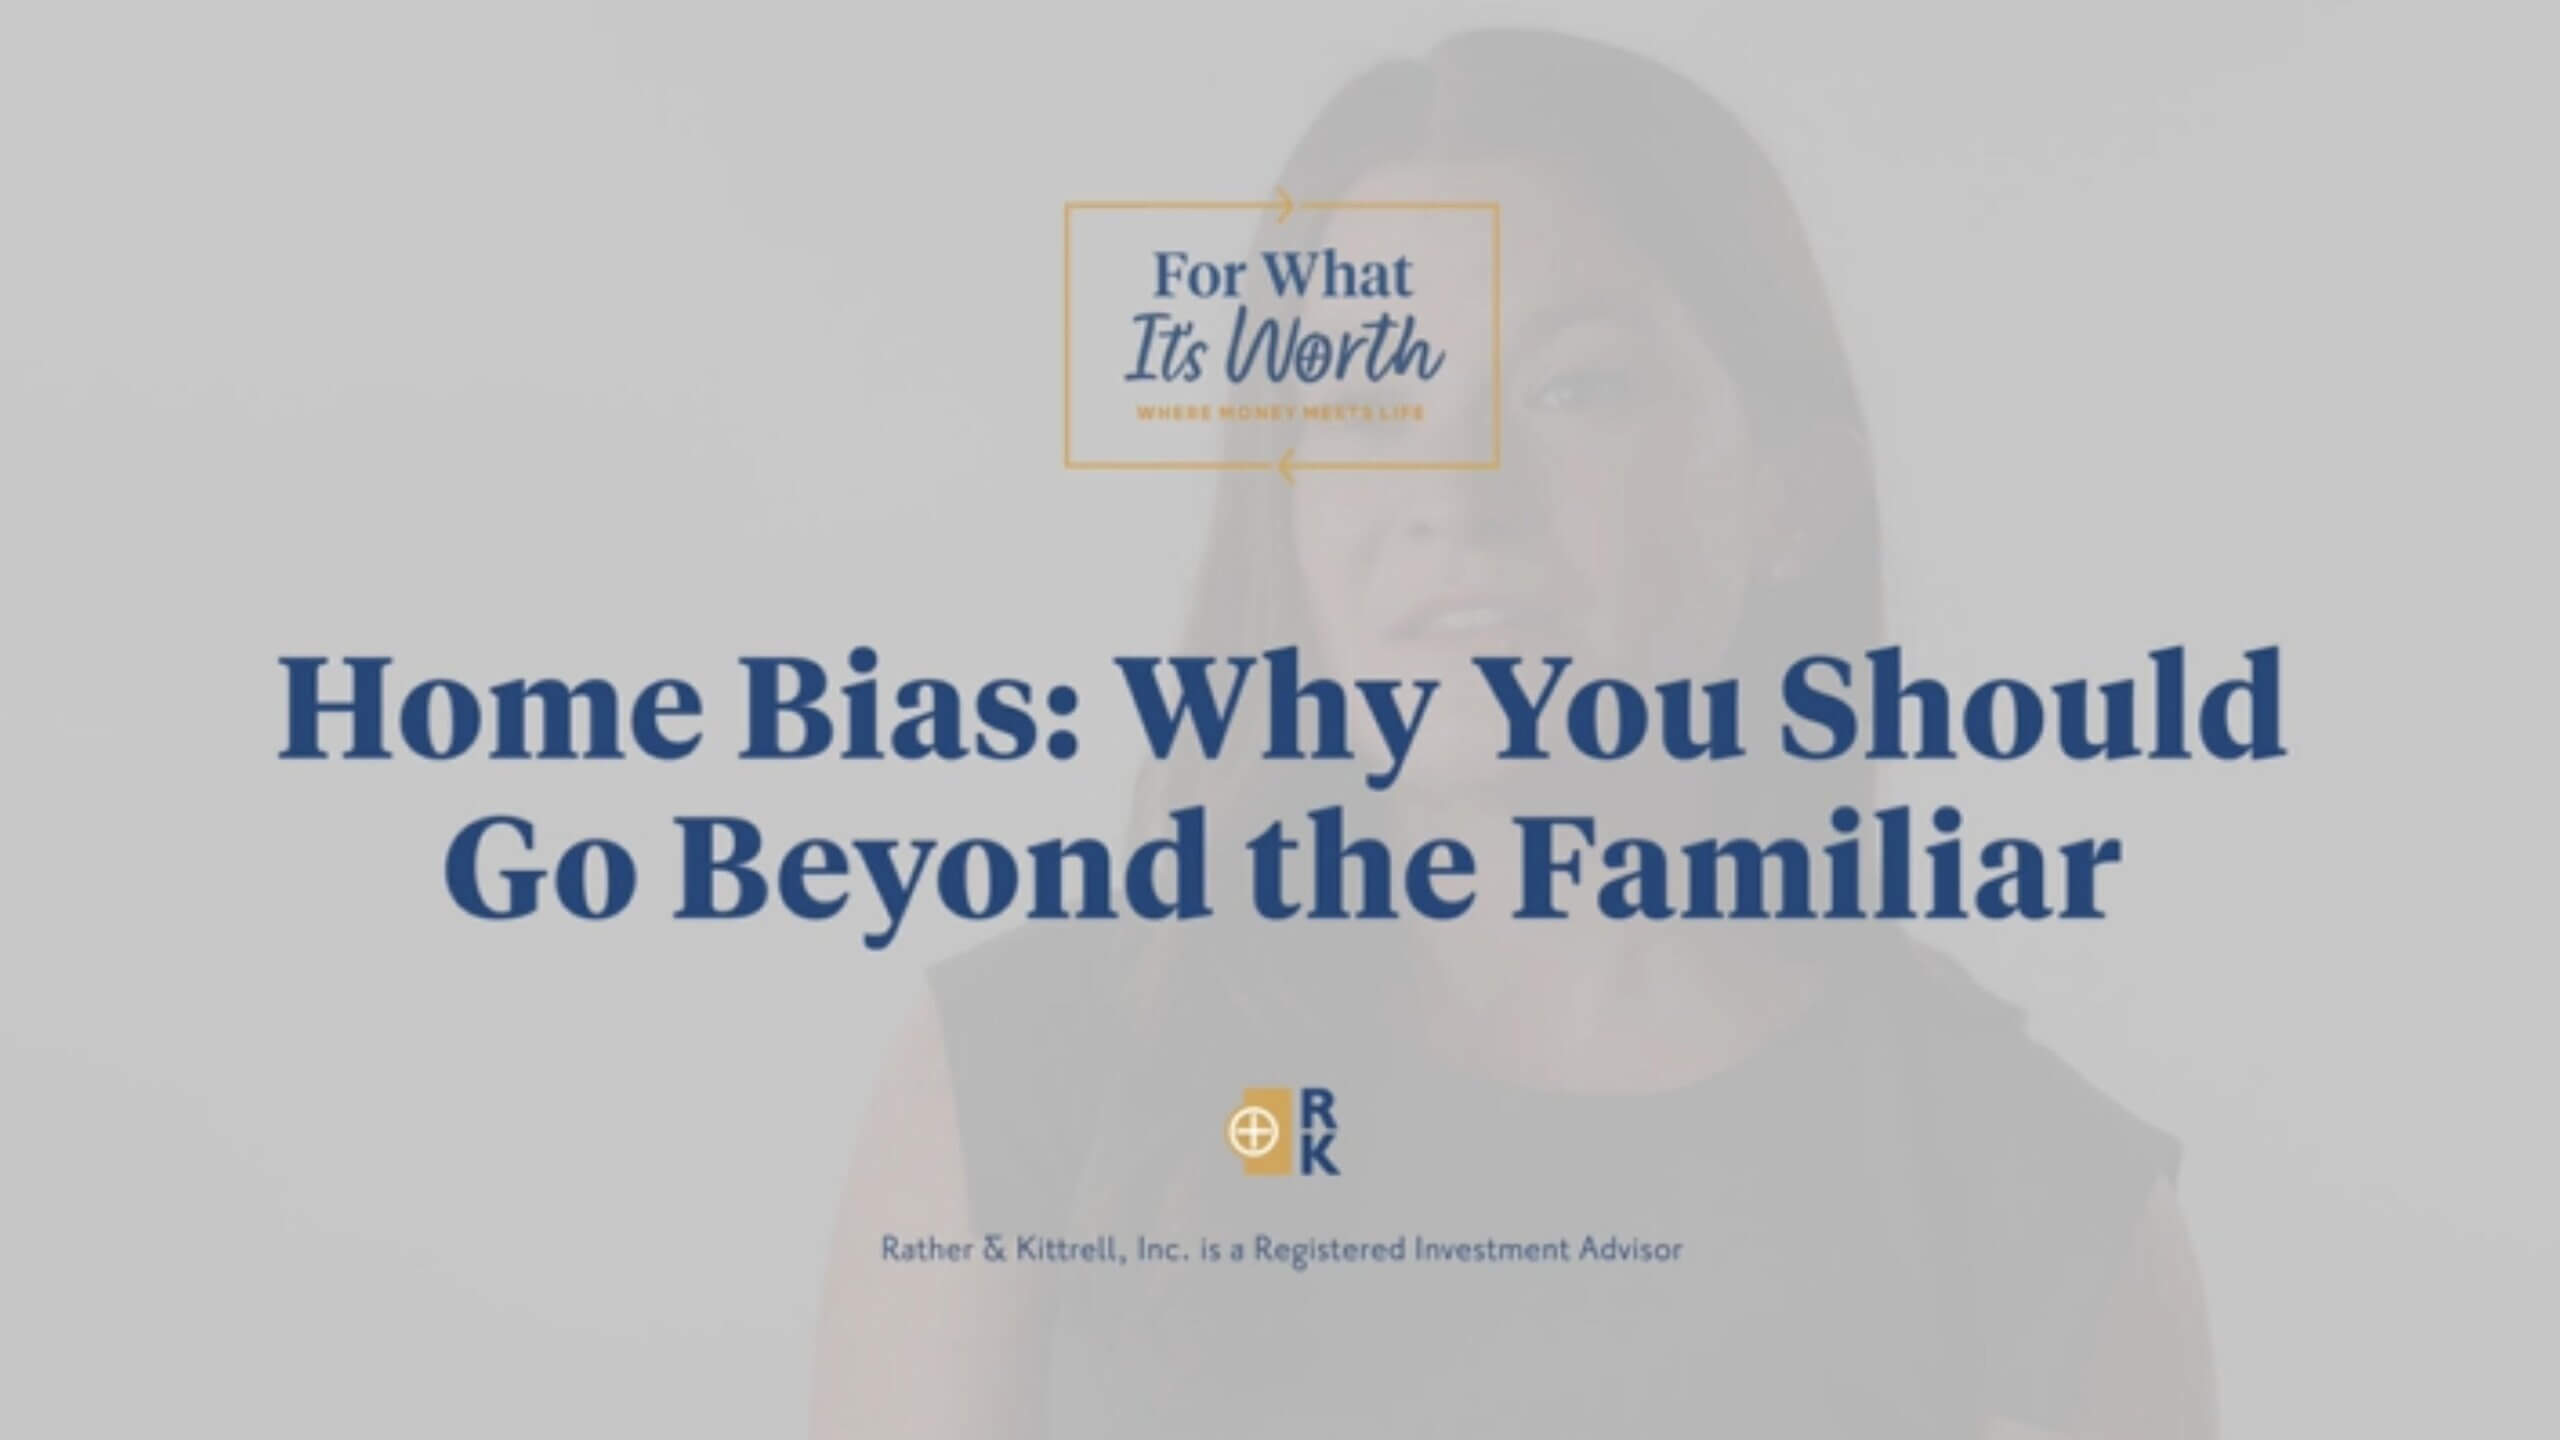 Home bias: why you should go beyond the familiar